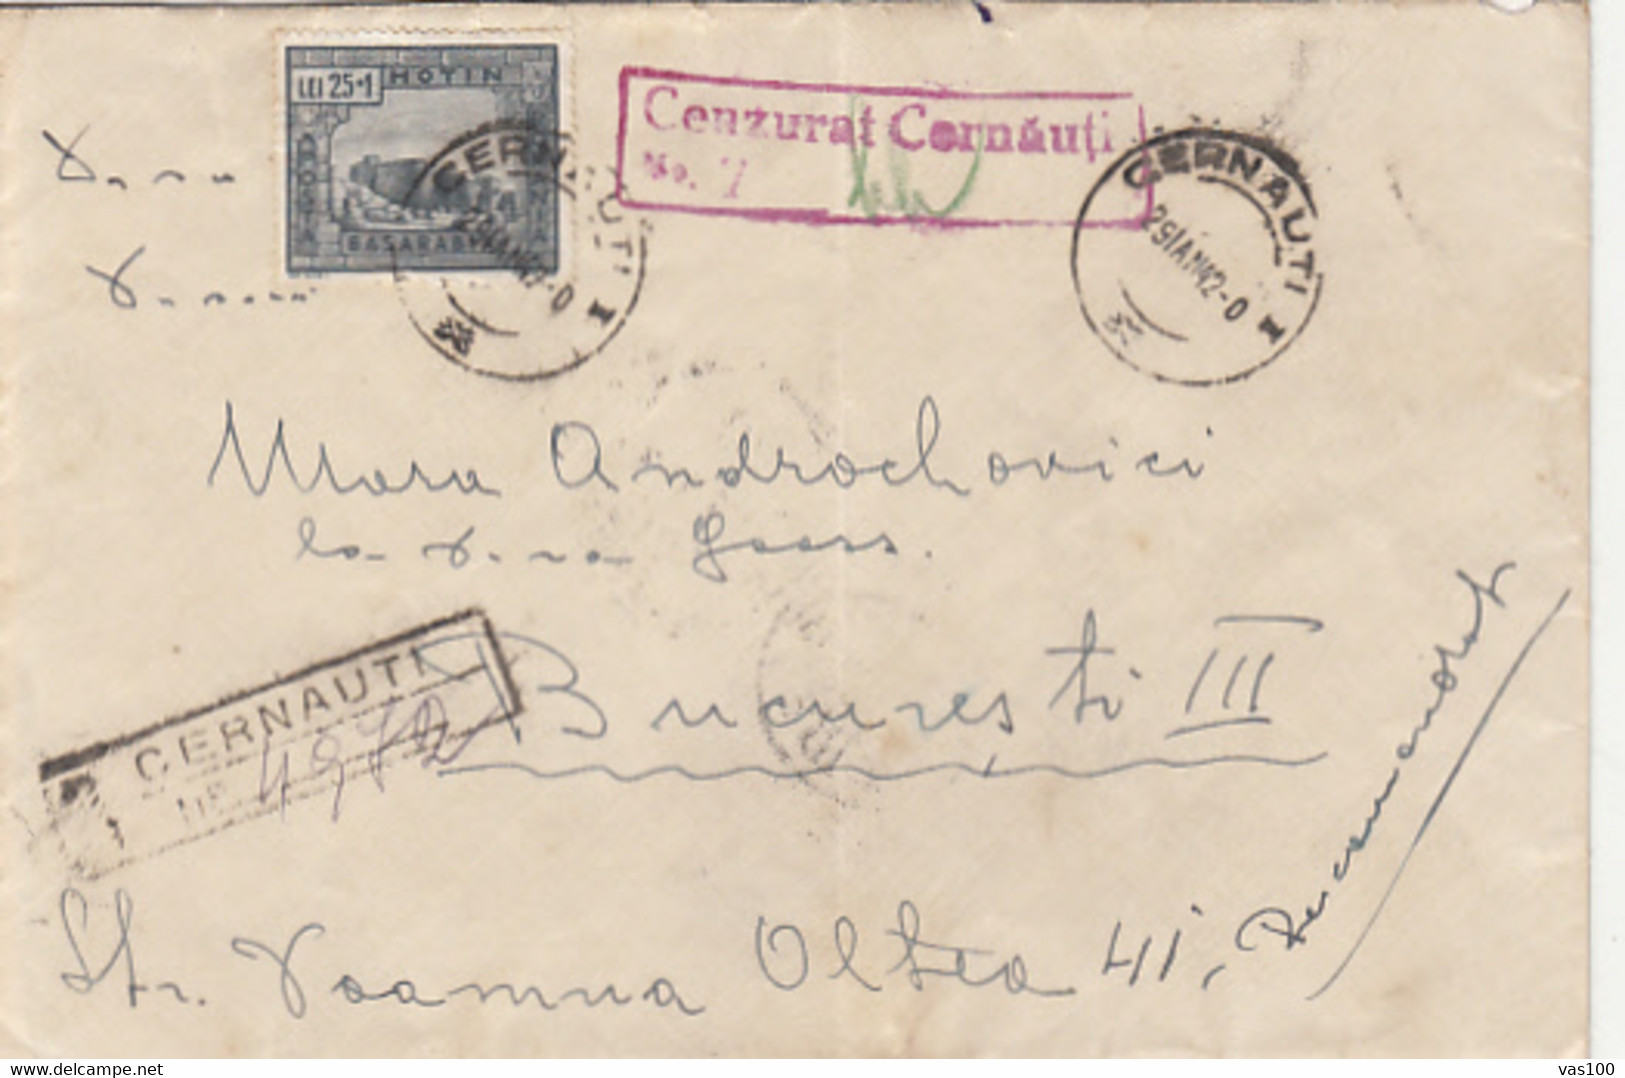 WW2 LETTER, CENSORED CERNAUTI NR 7, KHOTYN FORTRESS-BESSARABIA STAMP ON REGISTERED COVER, 1942, ROMANIA - 2. Weltkrieg (Briefe)